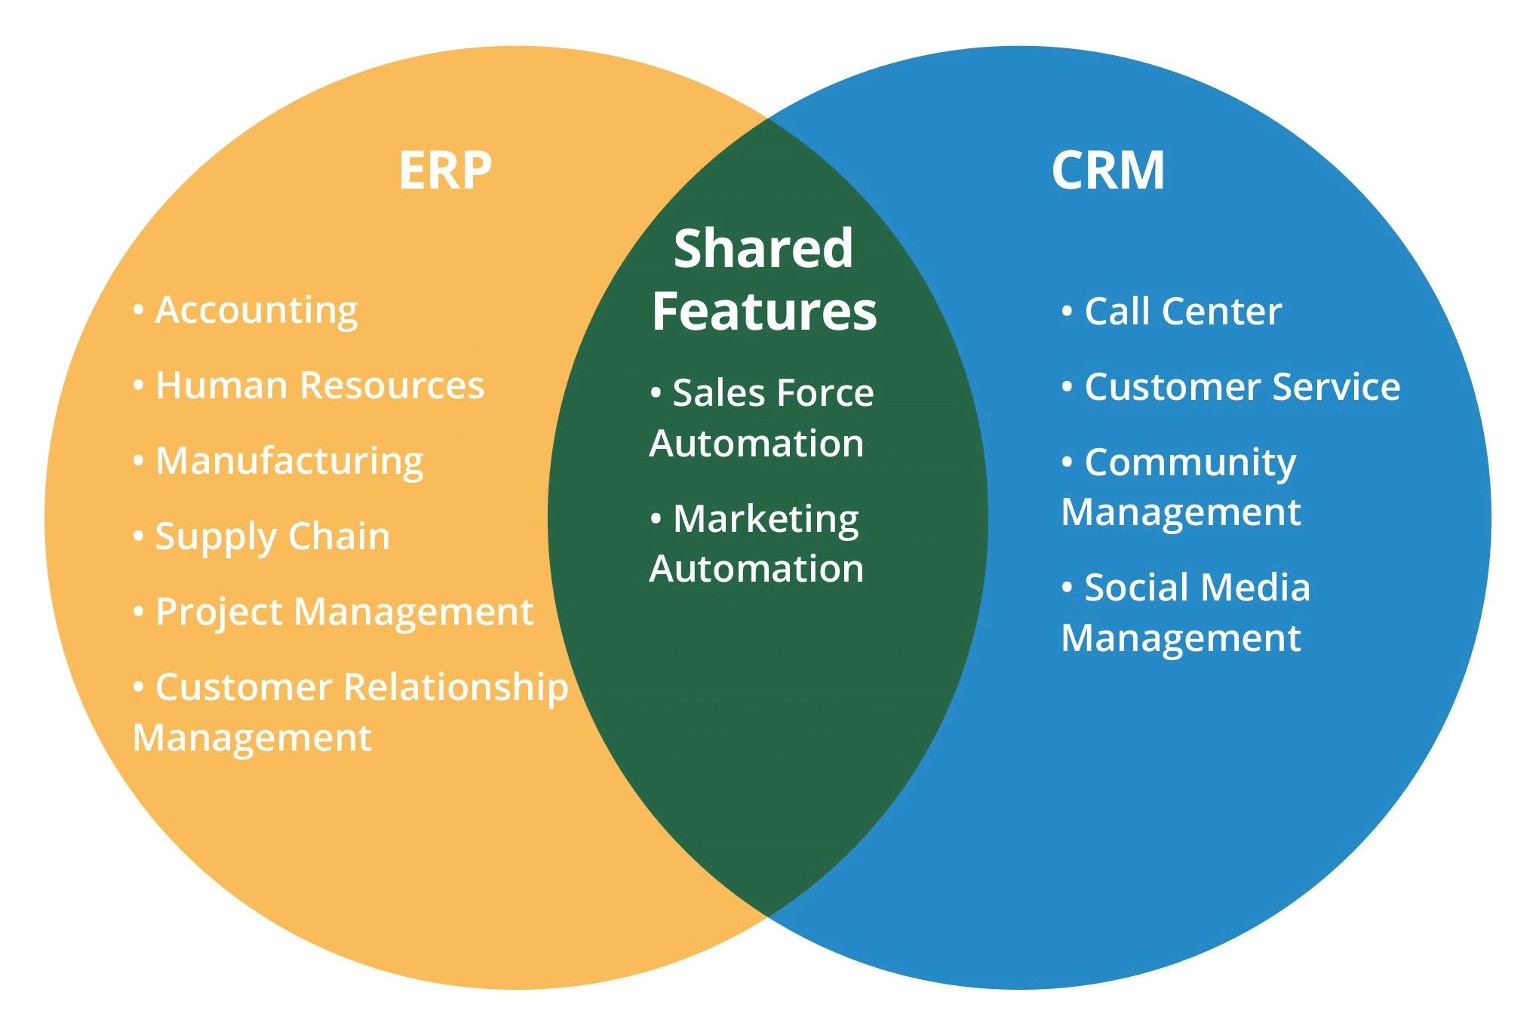 What is the difference between CRM and ERP systems